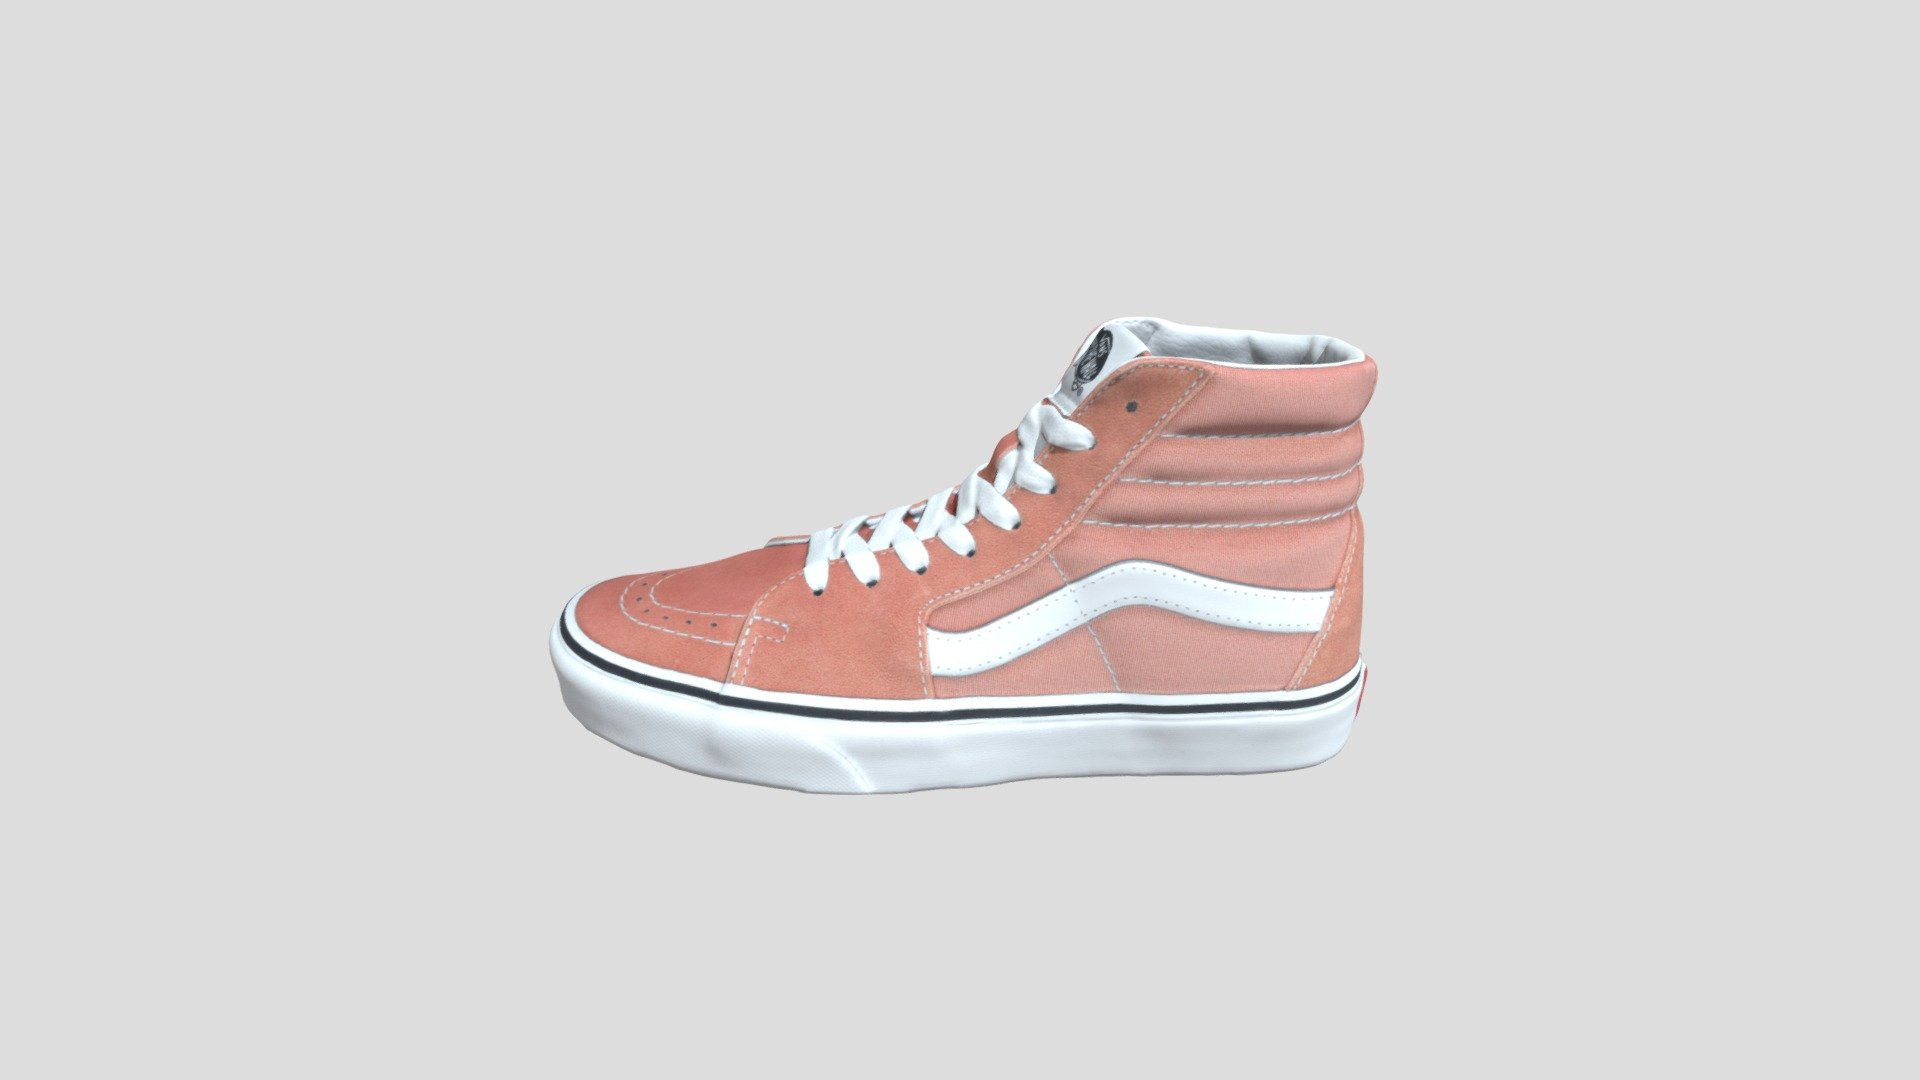 This model was created firstly by 3D scanning on retail version, and then being detail-improved manually, thus a 1:1 repulica of the original
PBR ready
Low-poly
4K texture
Welcome to check out other models we have to offer. And we do accept custom orders as well :) - Vans Sk8-Hi 玫瑰粉_VN0A4BV61UL - Buy Royalty Free 3D model by TRARGUS 3d model